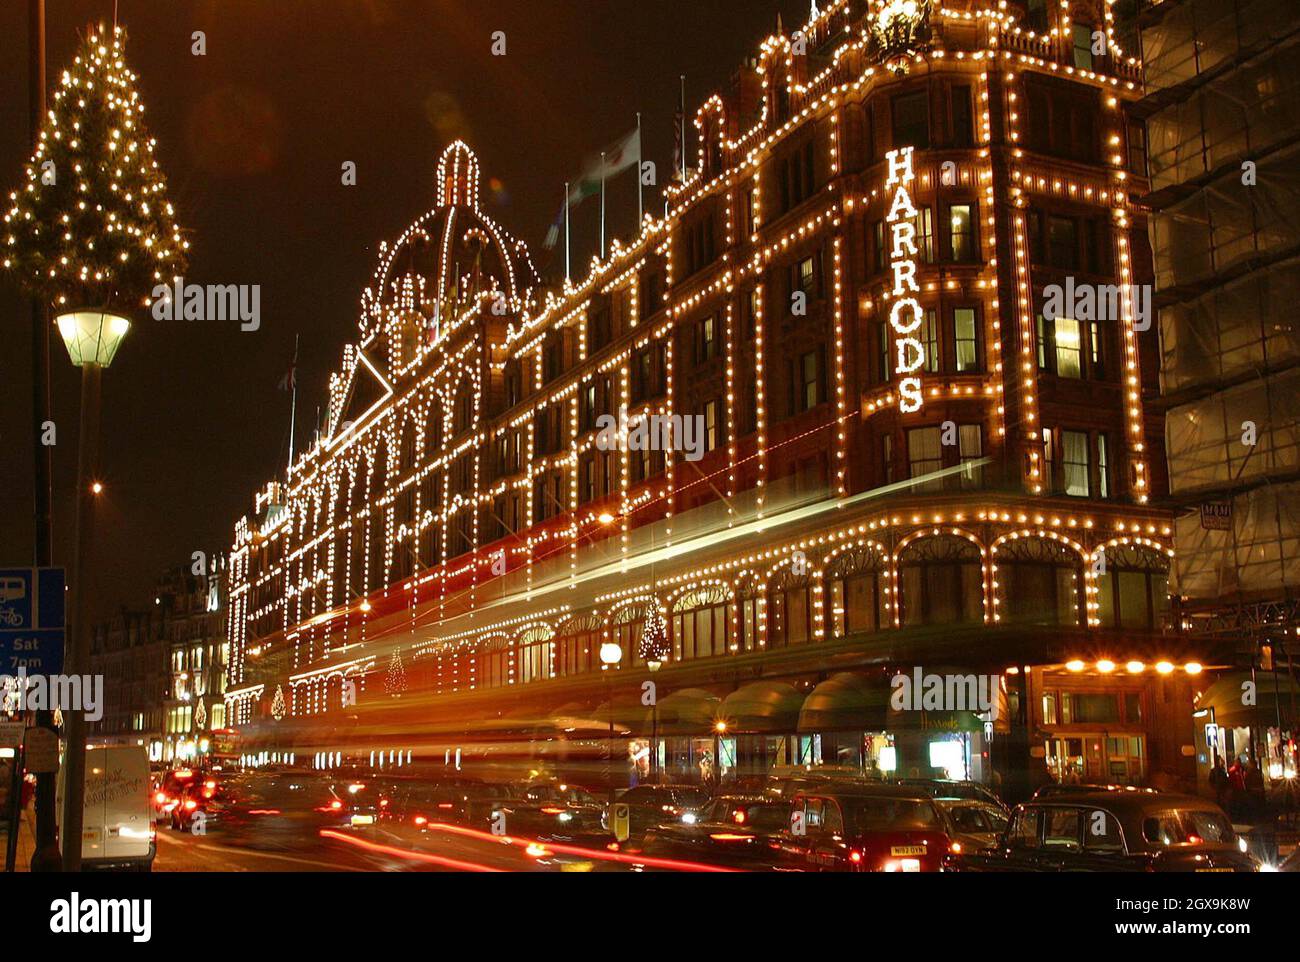 Mohamed al Fayed\'s exclusive London store, Harrods, shows off its ...